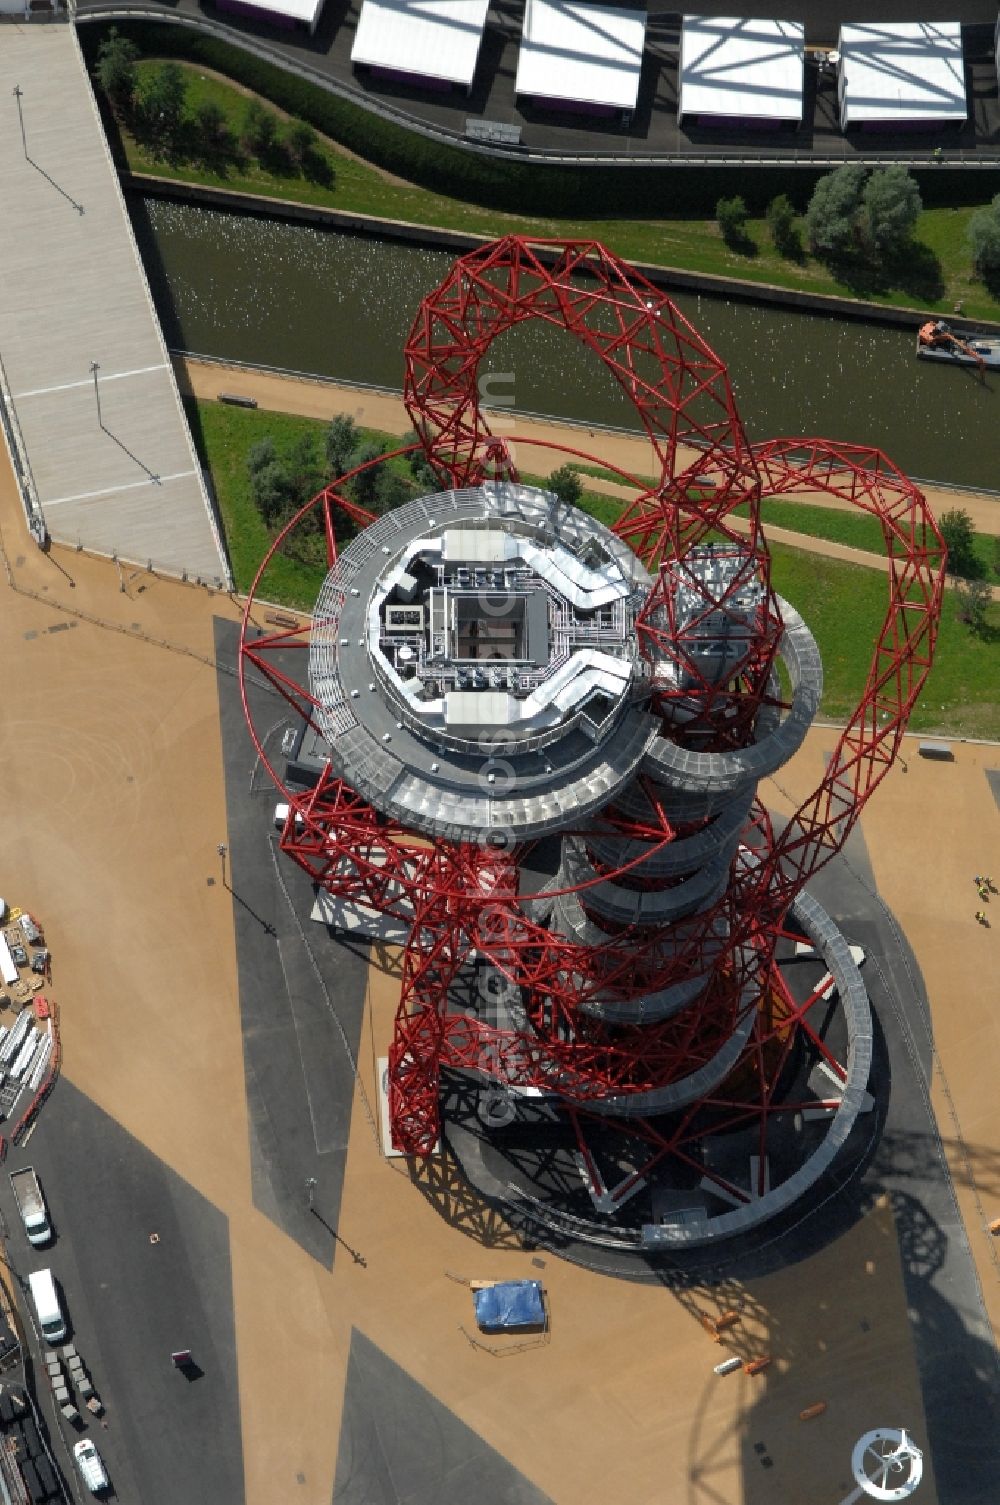 London from above - The ArcelorMittal Orbit is a 115-metre-high ( 377 ft ) observation tower in the Olympic Park in Stratford, London and is intended to be a permanent, lasting legacy of the Olympic and Paralympic Games 2012 in Great Britain